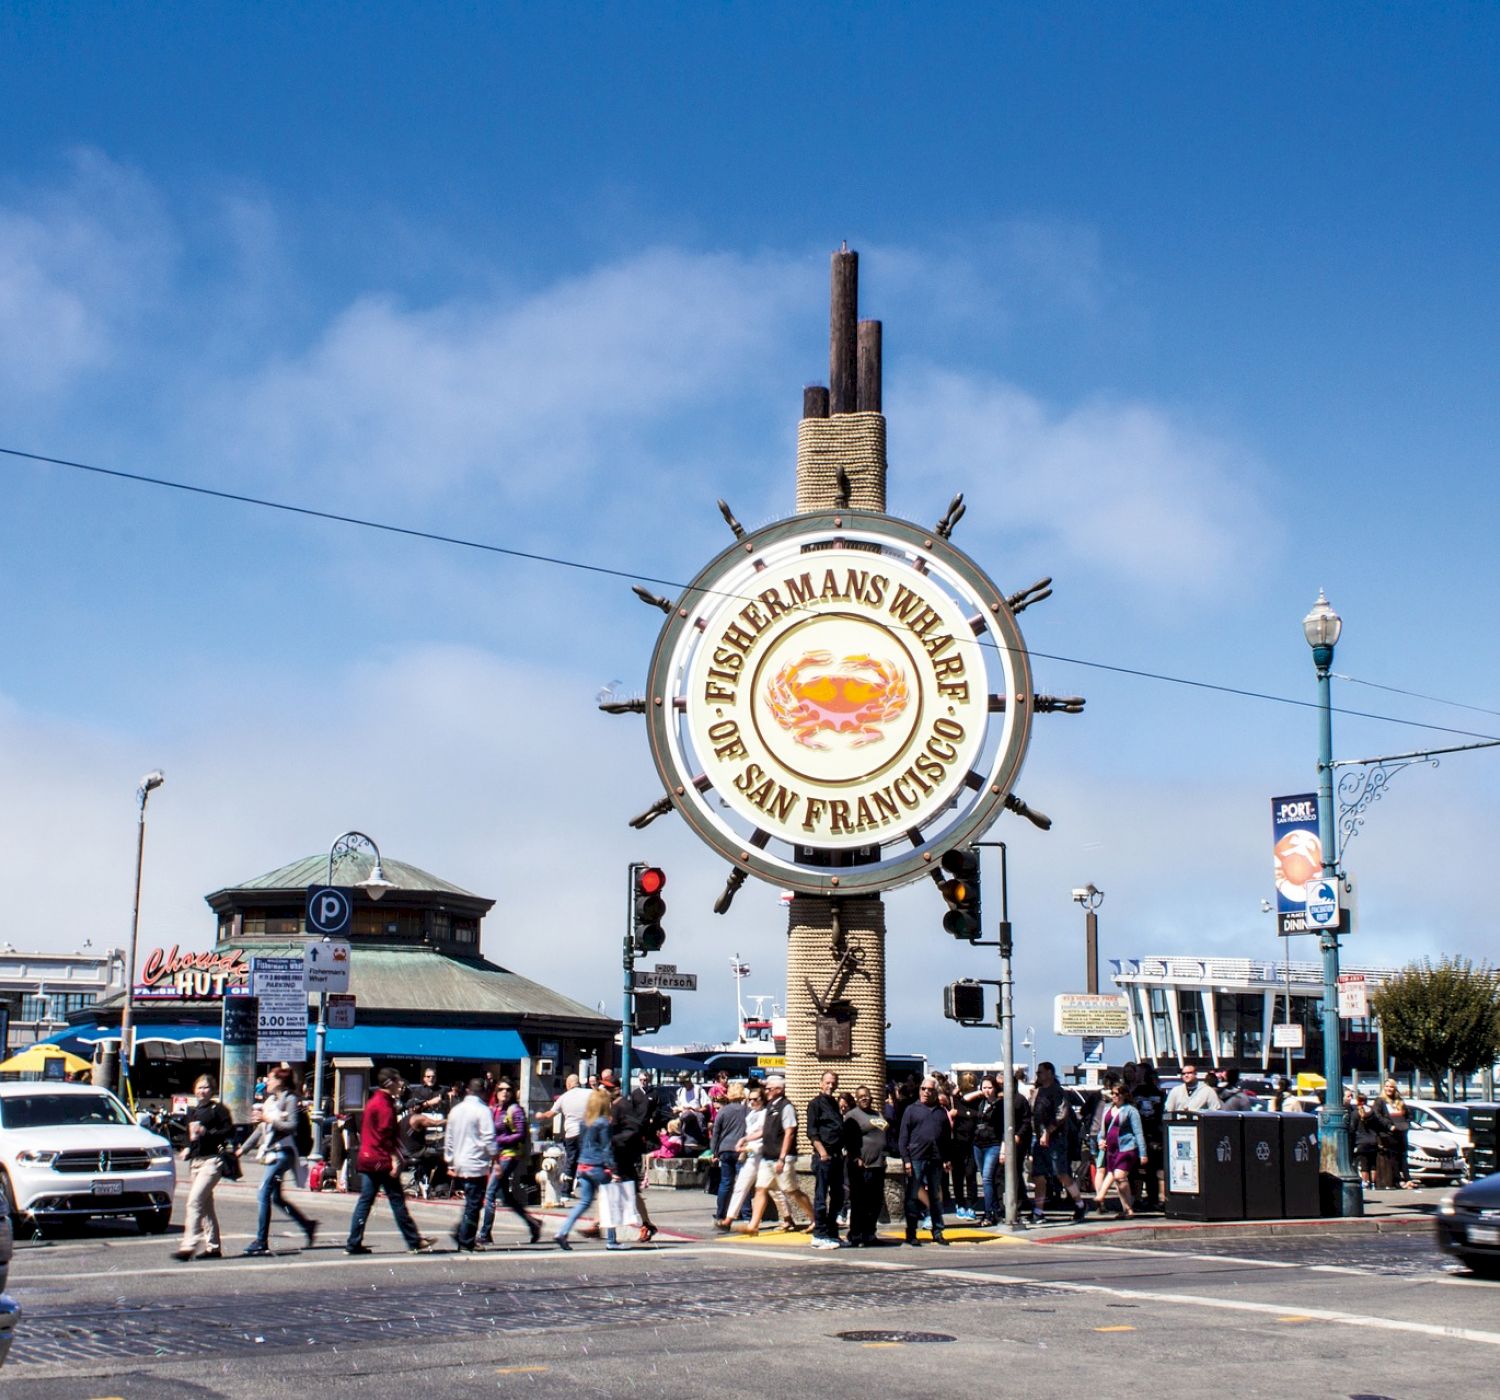 A bustling street scene in Fisherman's Wharf, San Francisco with people and cars passing by, featuring the iconic Fisherman's Wharf sign.